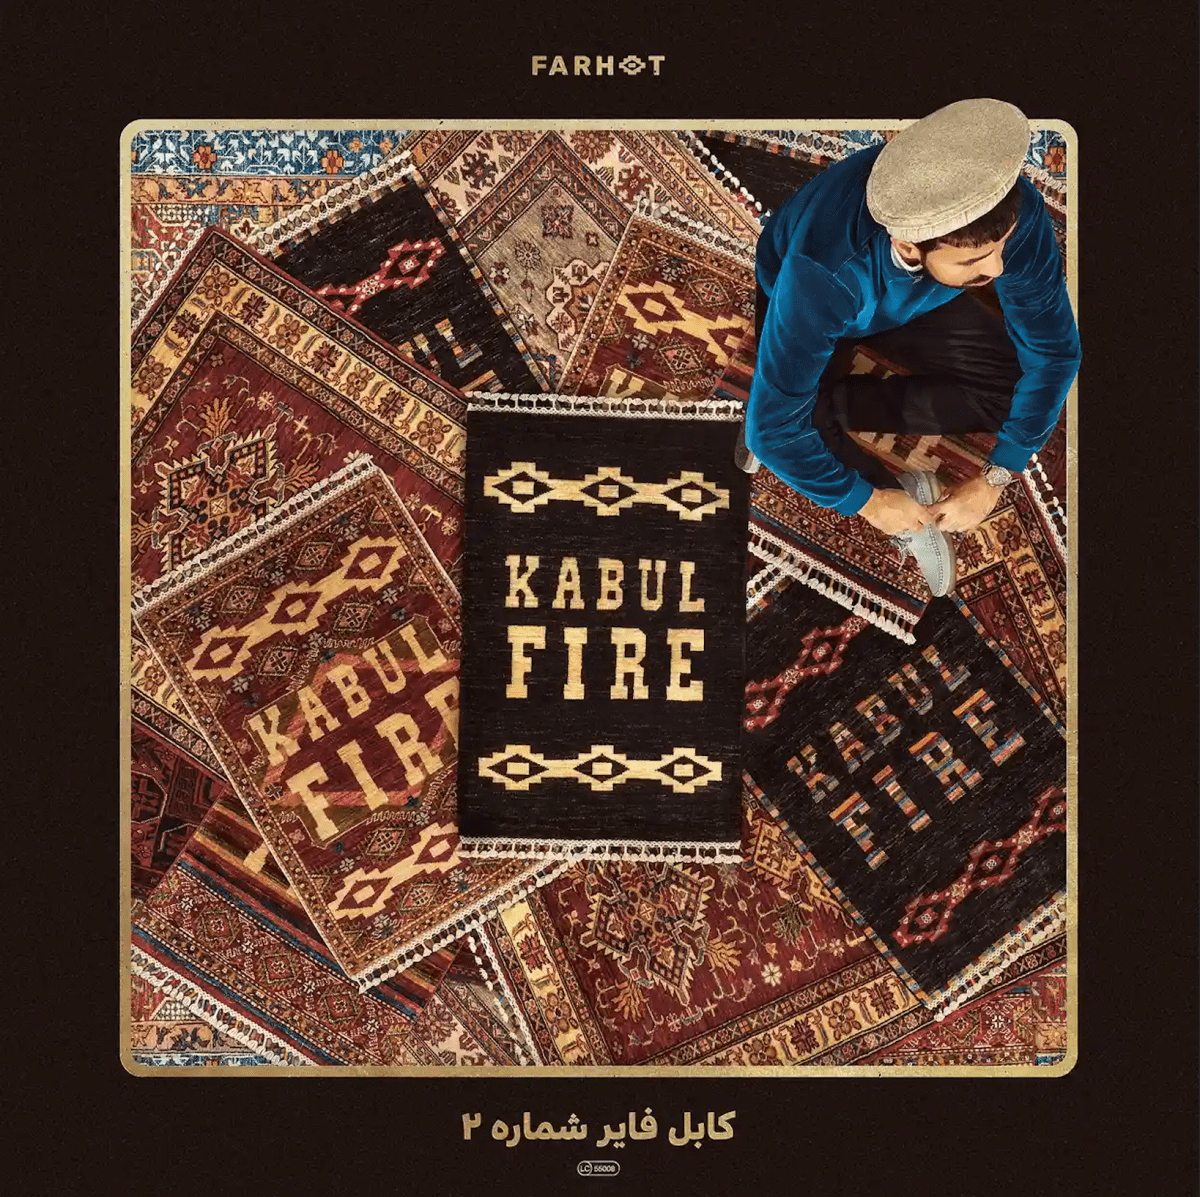 Album cover for Kabul Fire Vol 2 from Farhot.